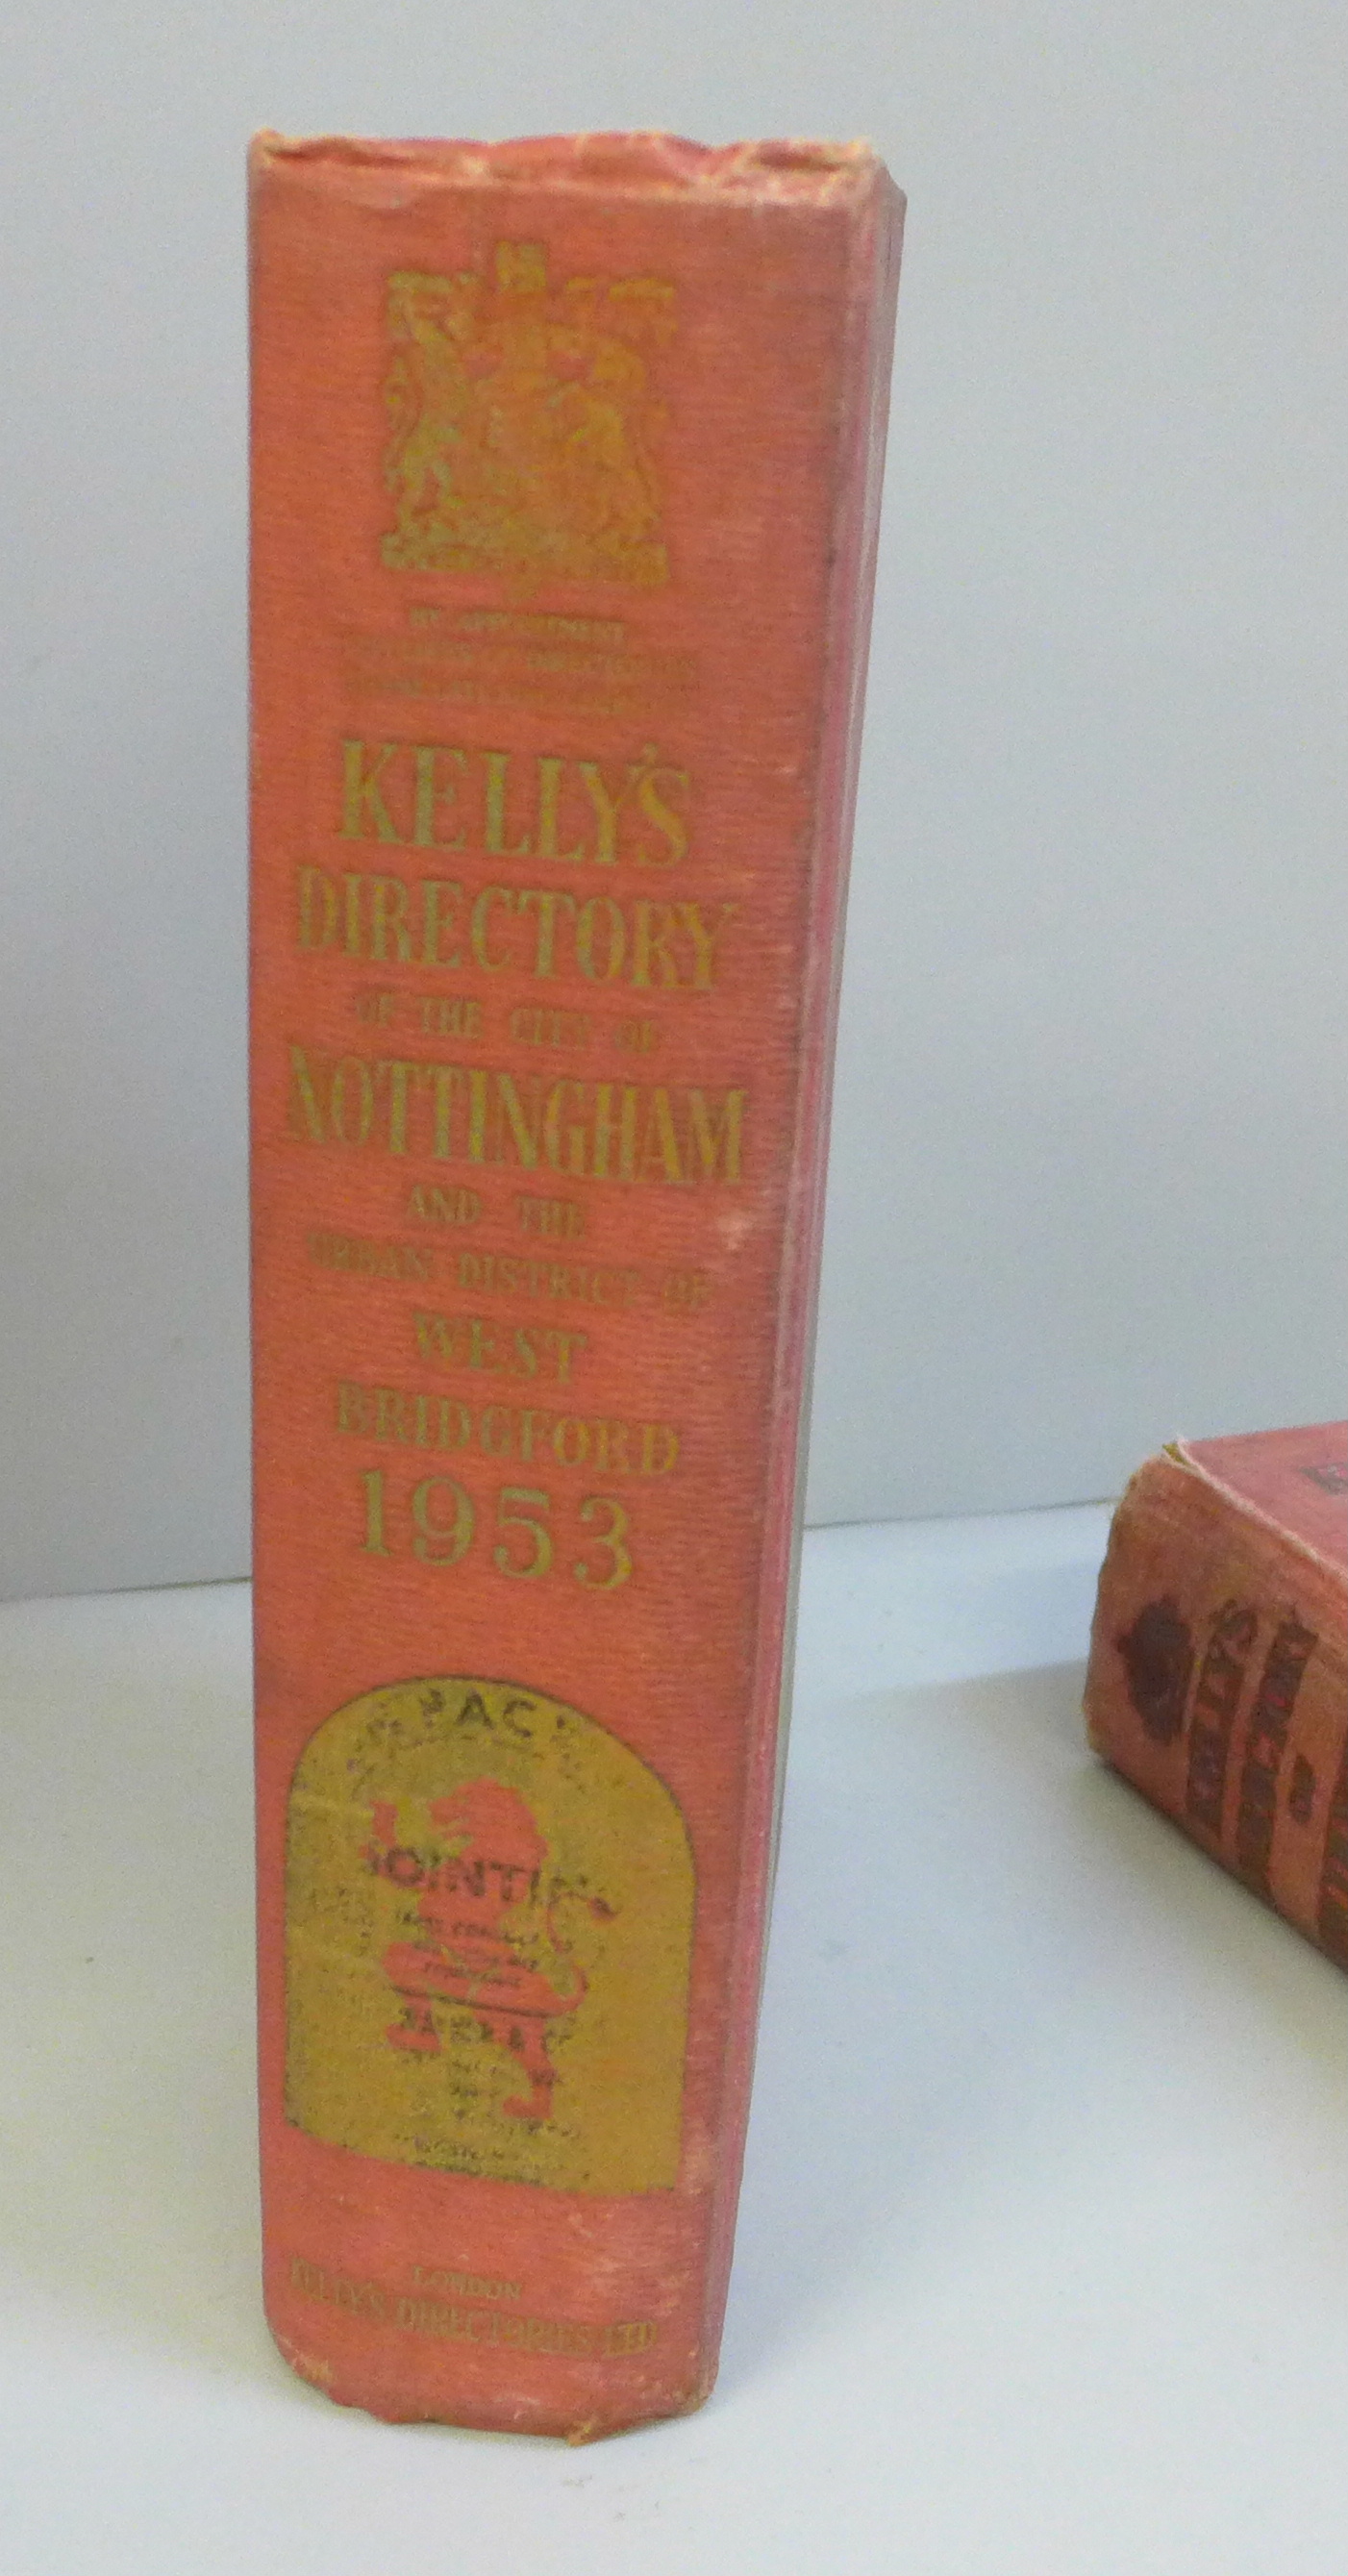 Kelly's Directory of Nottingham and West Bridgford 1953 and Kelly's Directory of Lincolnshire 1933 - Image 5 of 8